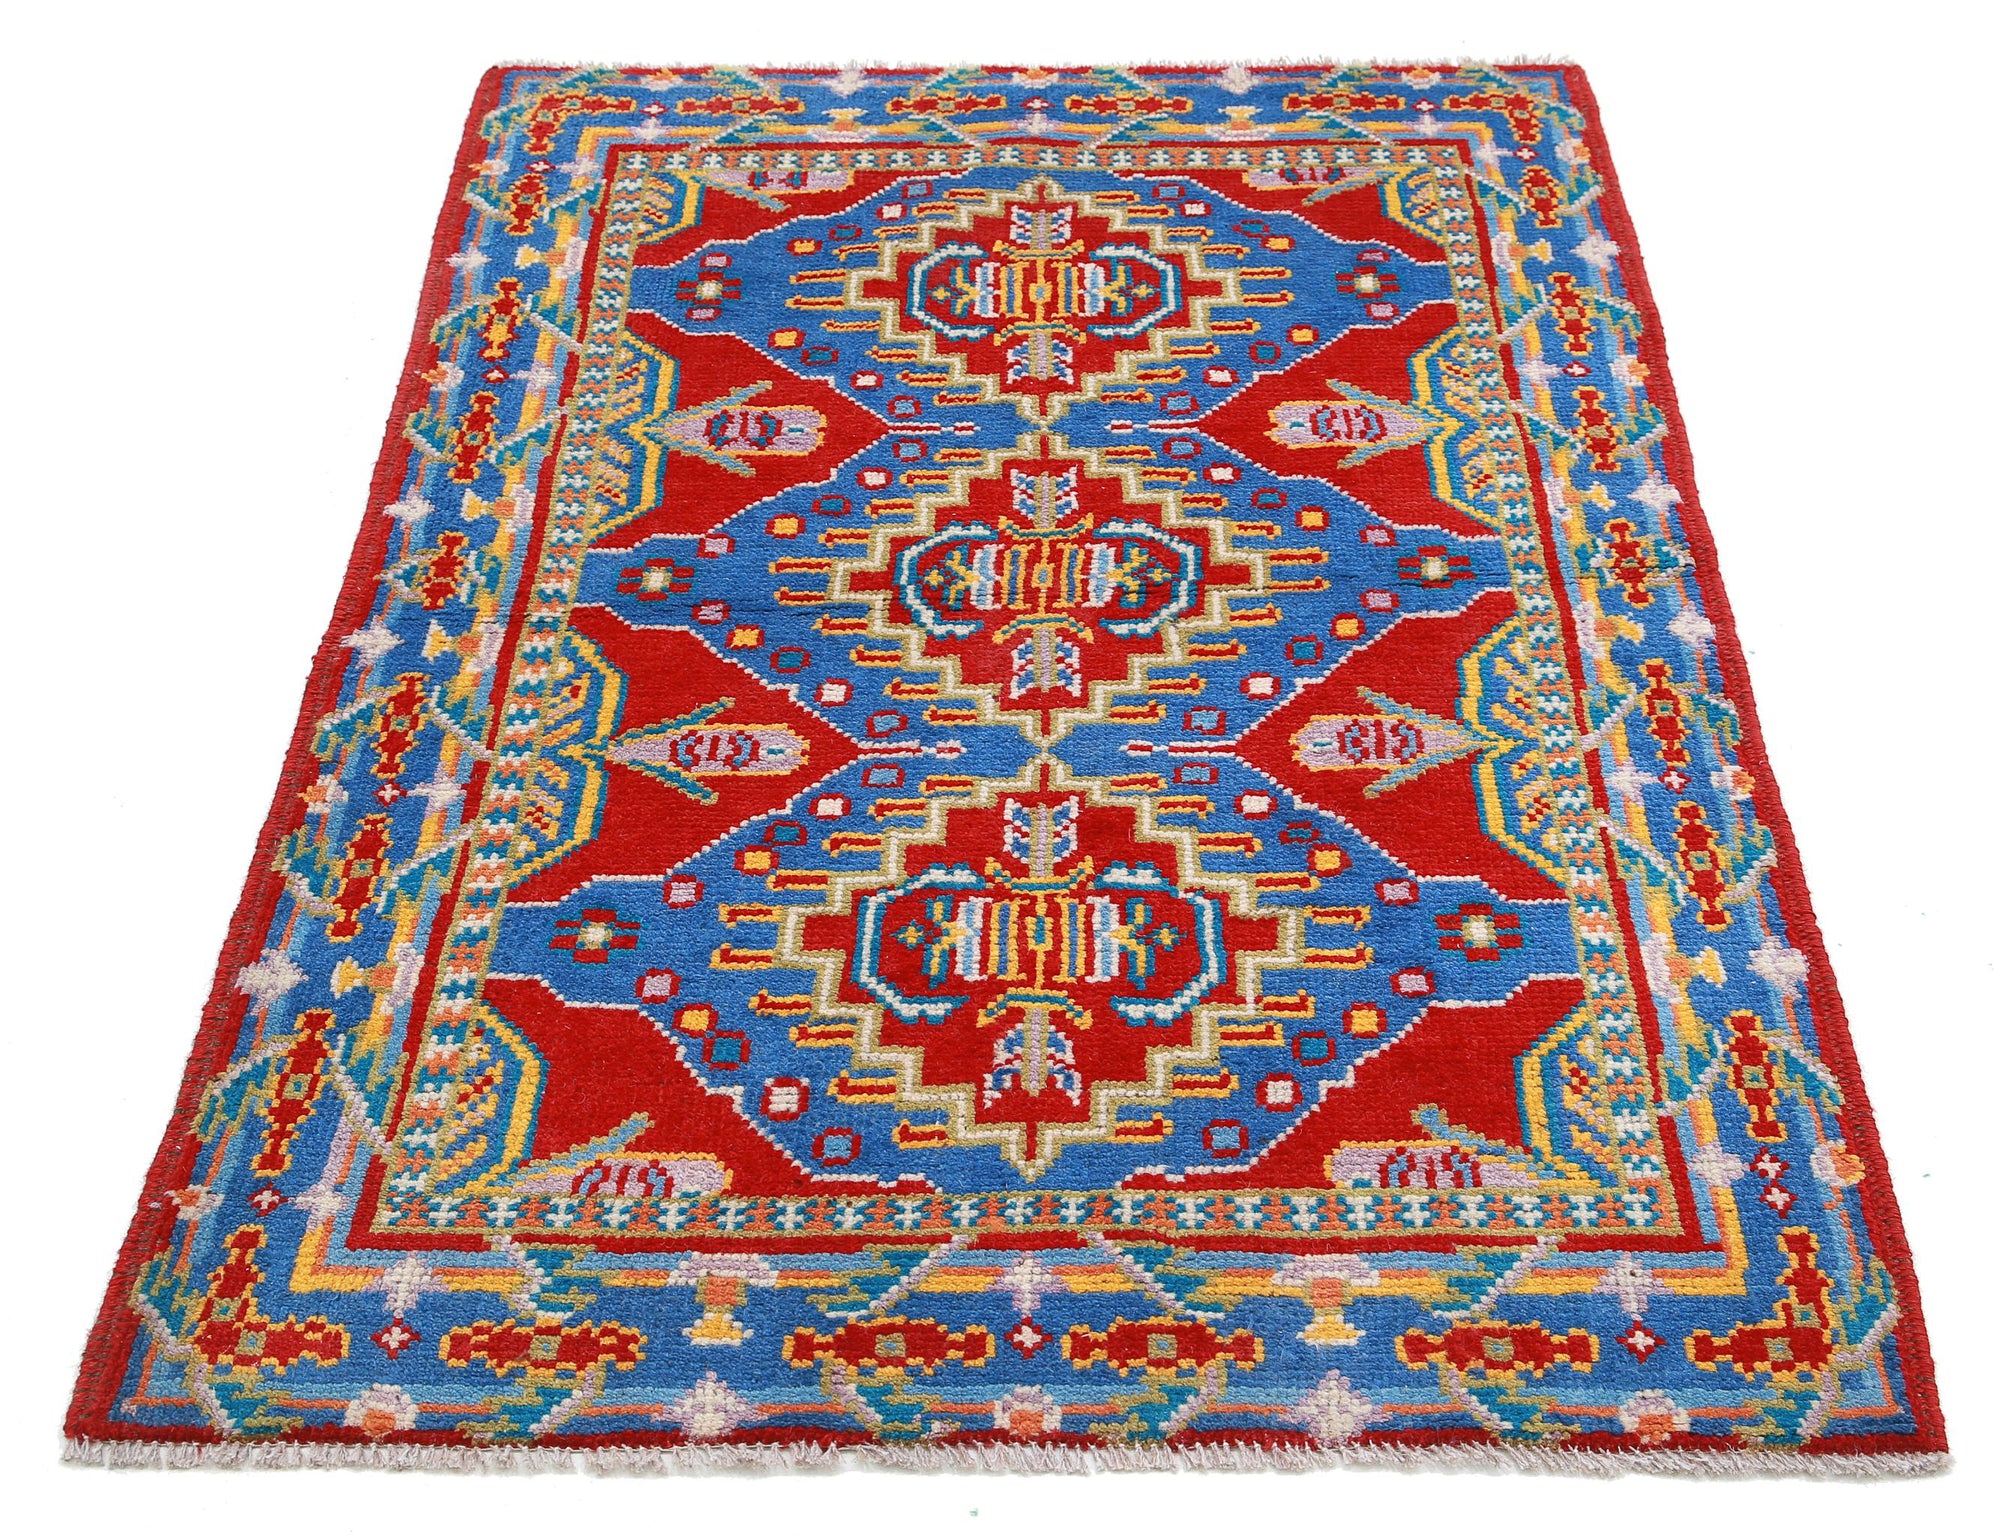 Revival-hand-knotted-qarghani-wool-rug-5014207-3.jpg